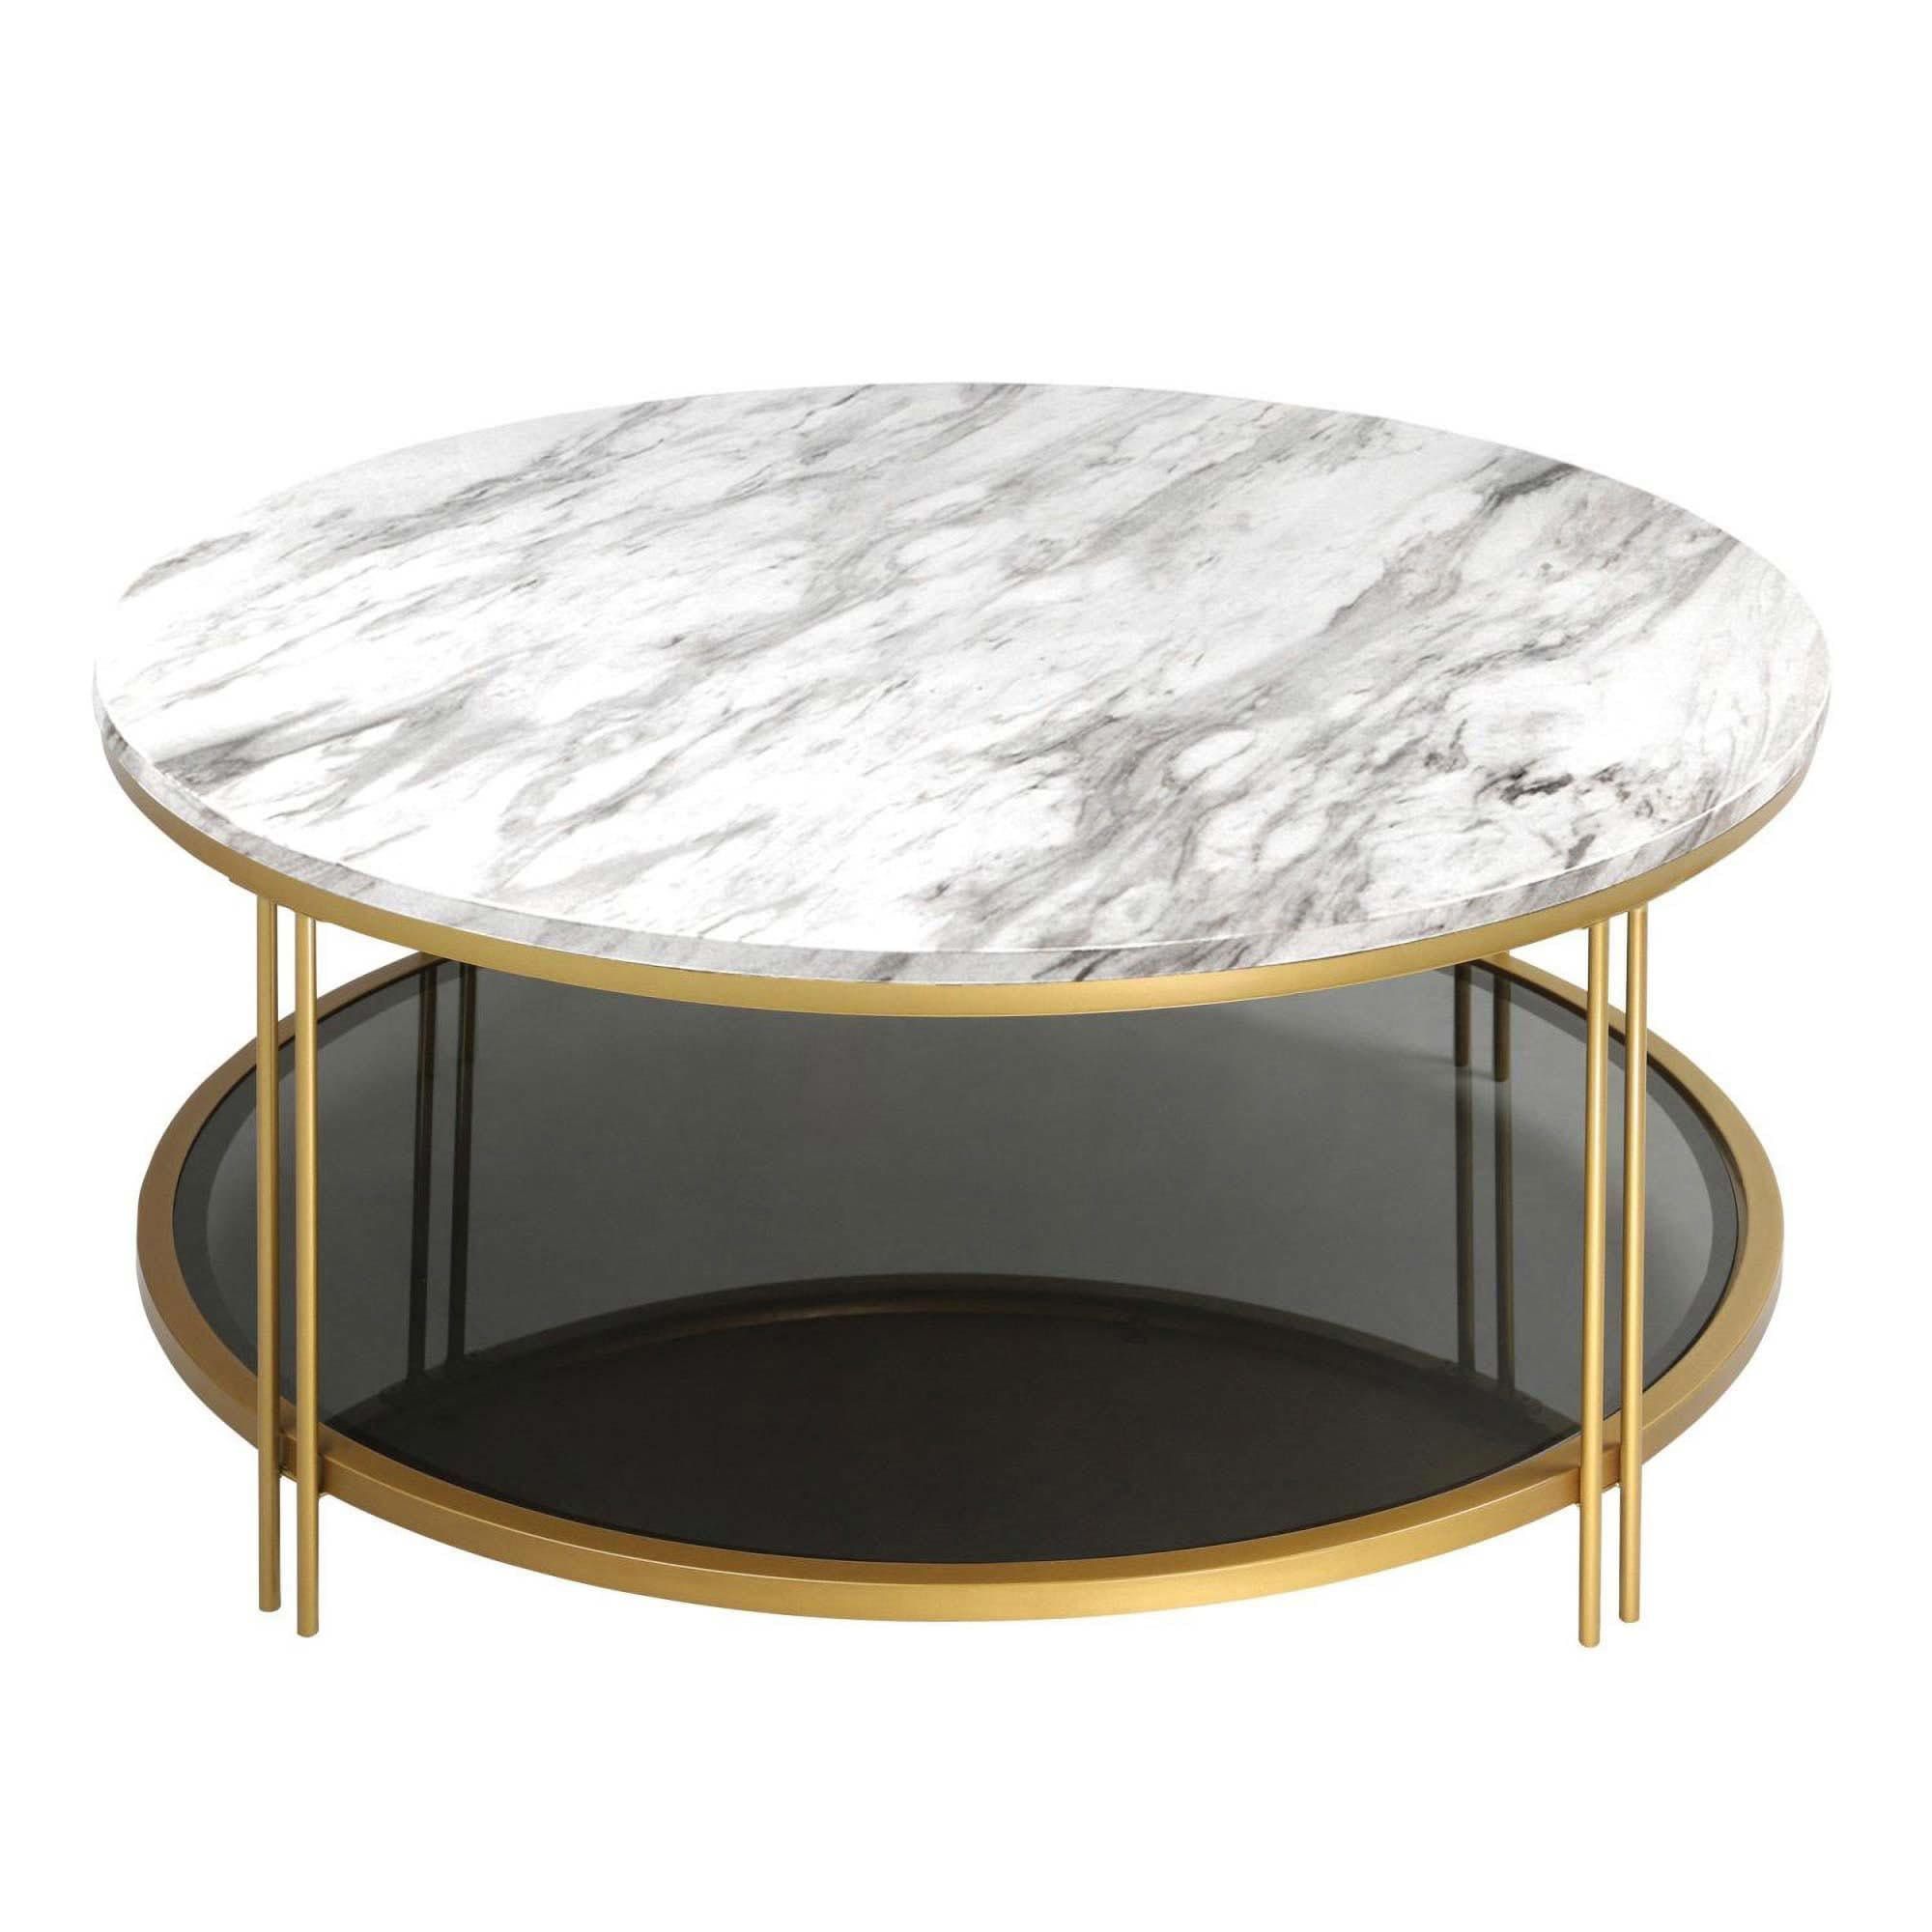 Uolfin Hera Marble Paper Top With Pu Finish Faux Marble Modern Coffee Table  With Storage In The Coffee Tables Department At Lowes With Faux Marble Top Coffee Tables (View 2 of 15)